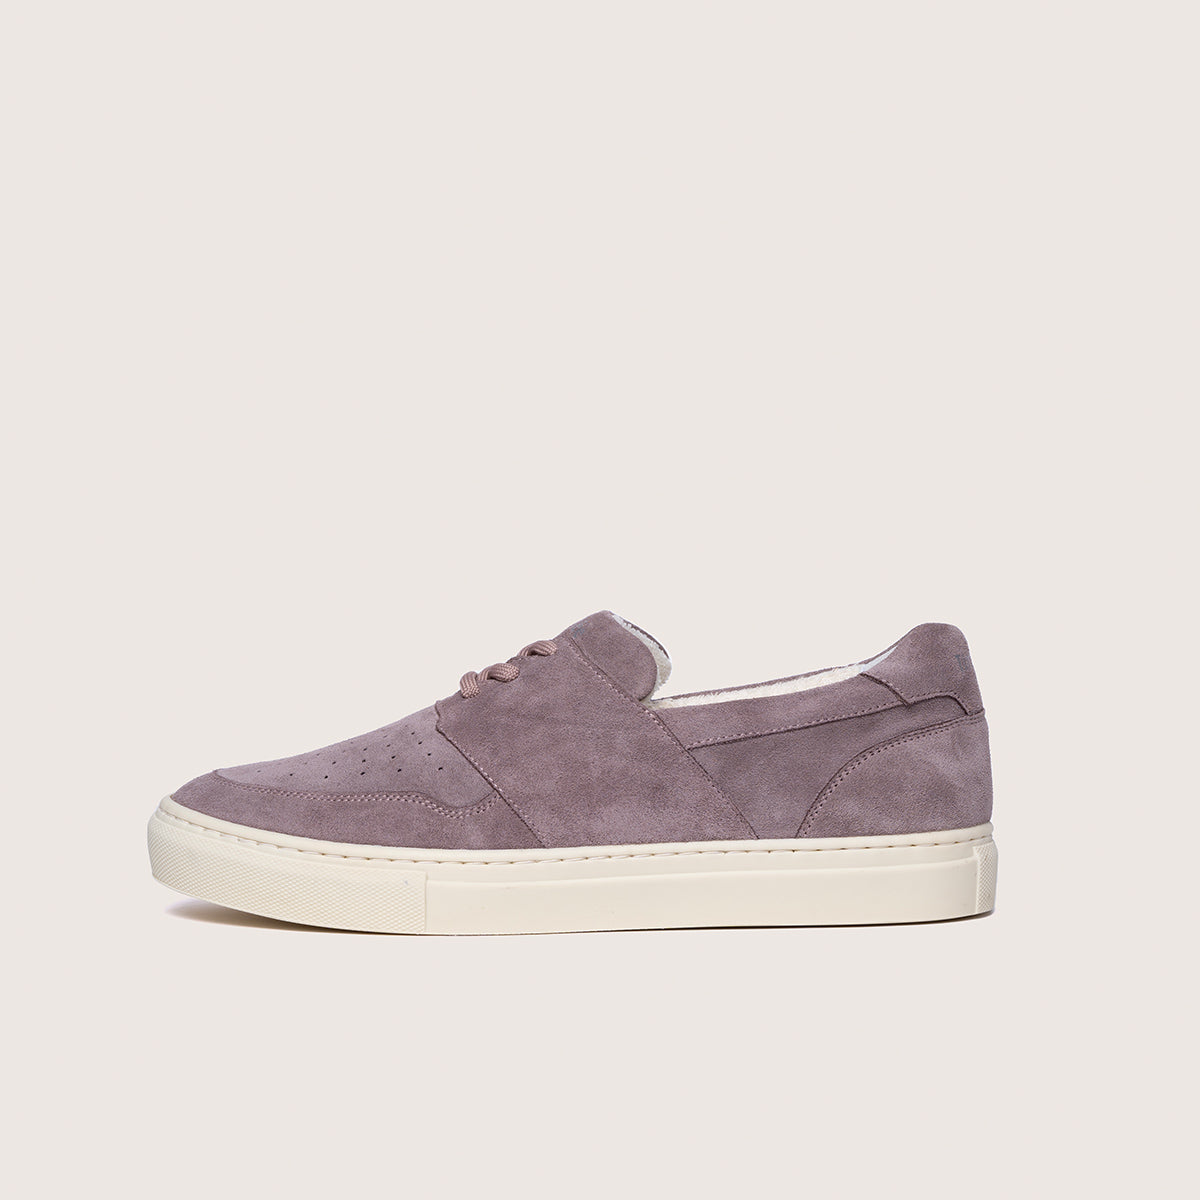 Timothee paris sneaker pyla oyster lilac profile photo suede leather